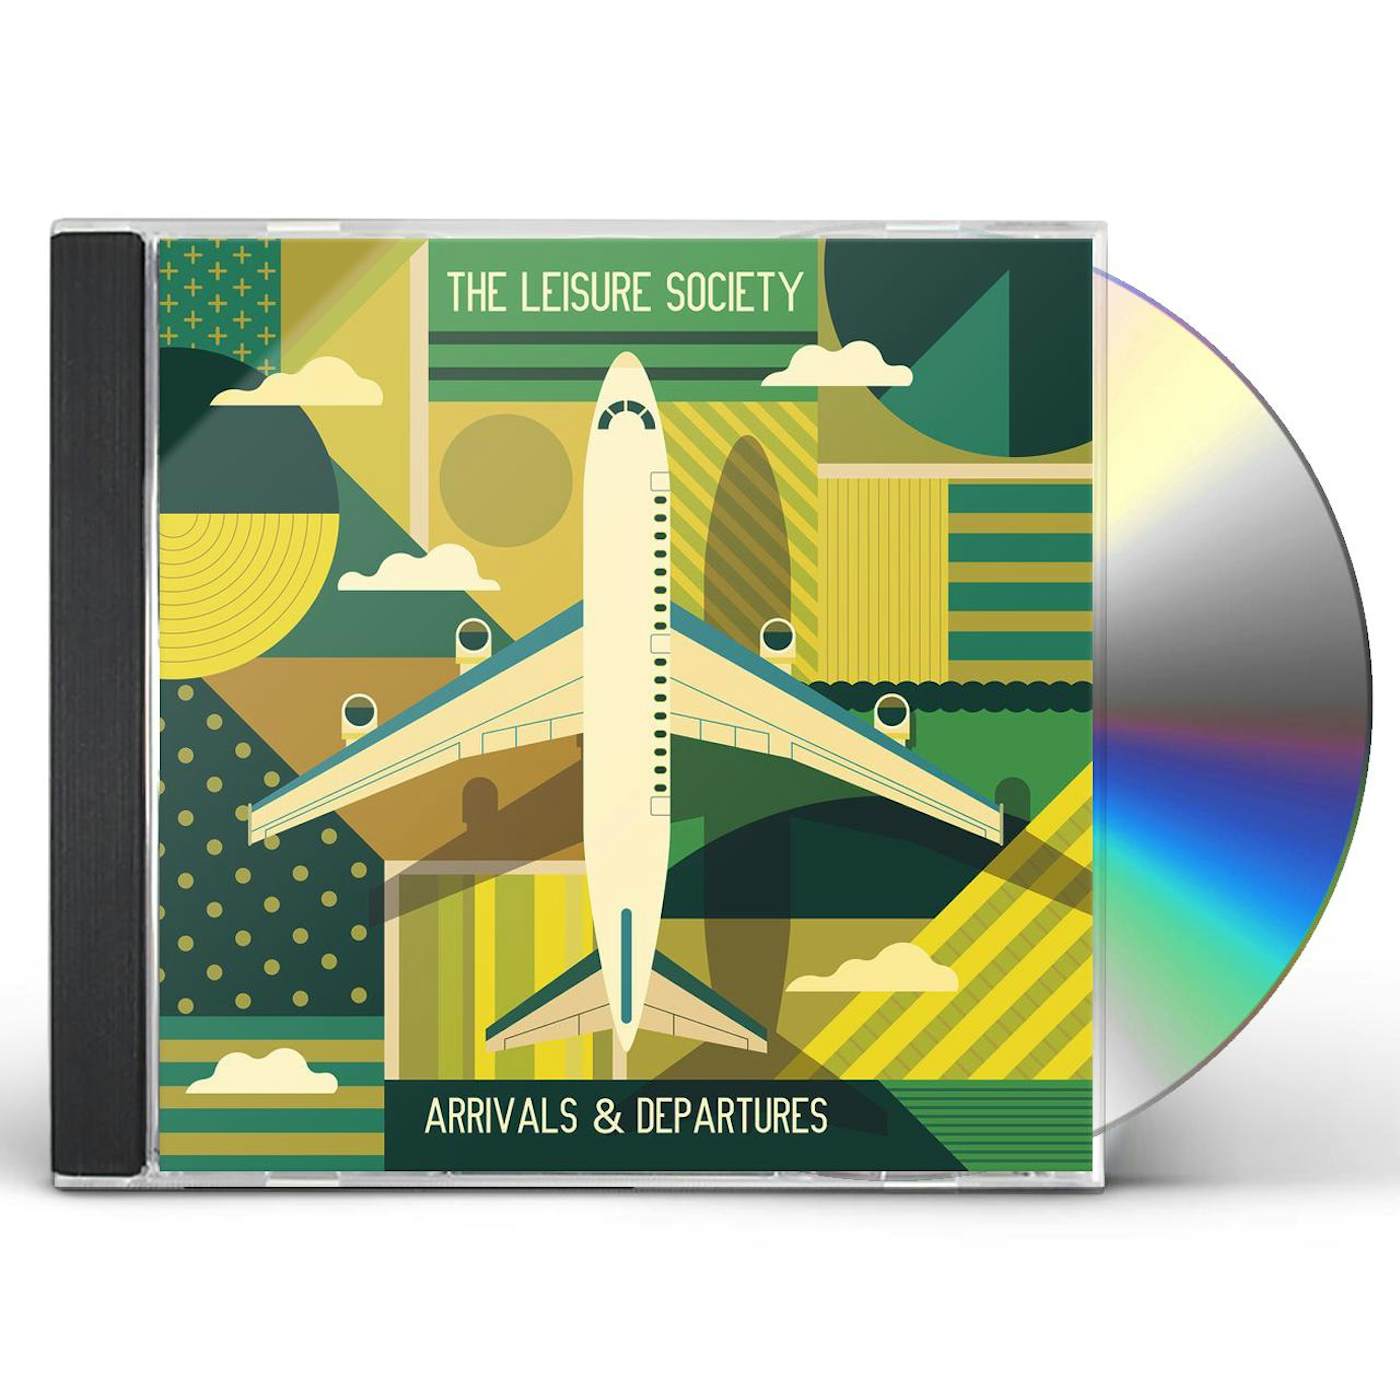 The Leisure Society Arrivals & Departures CD